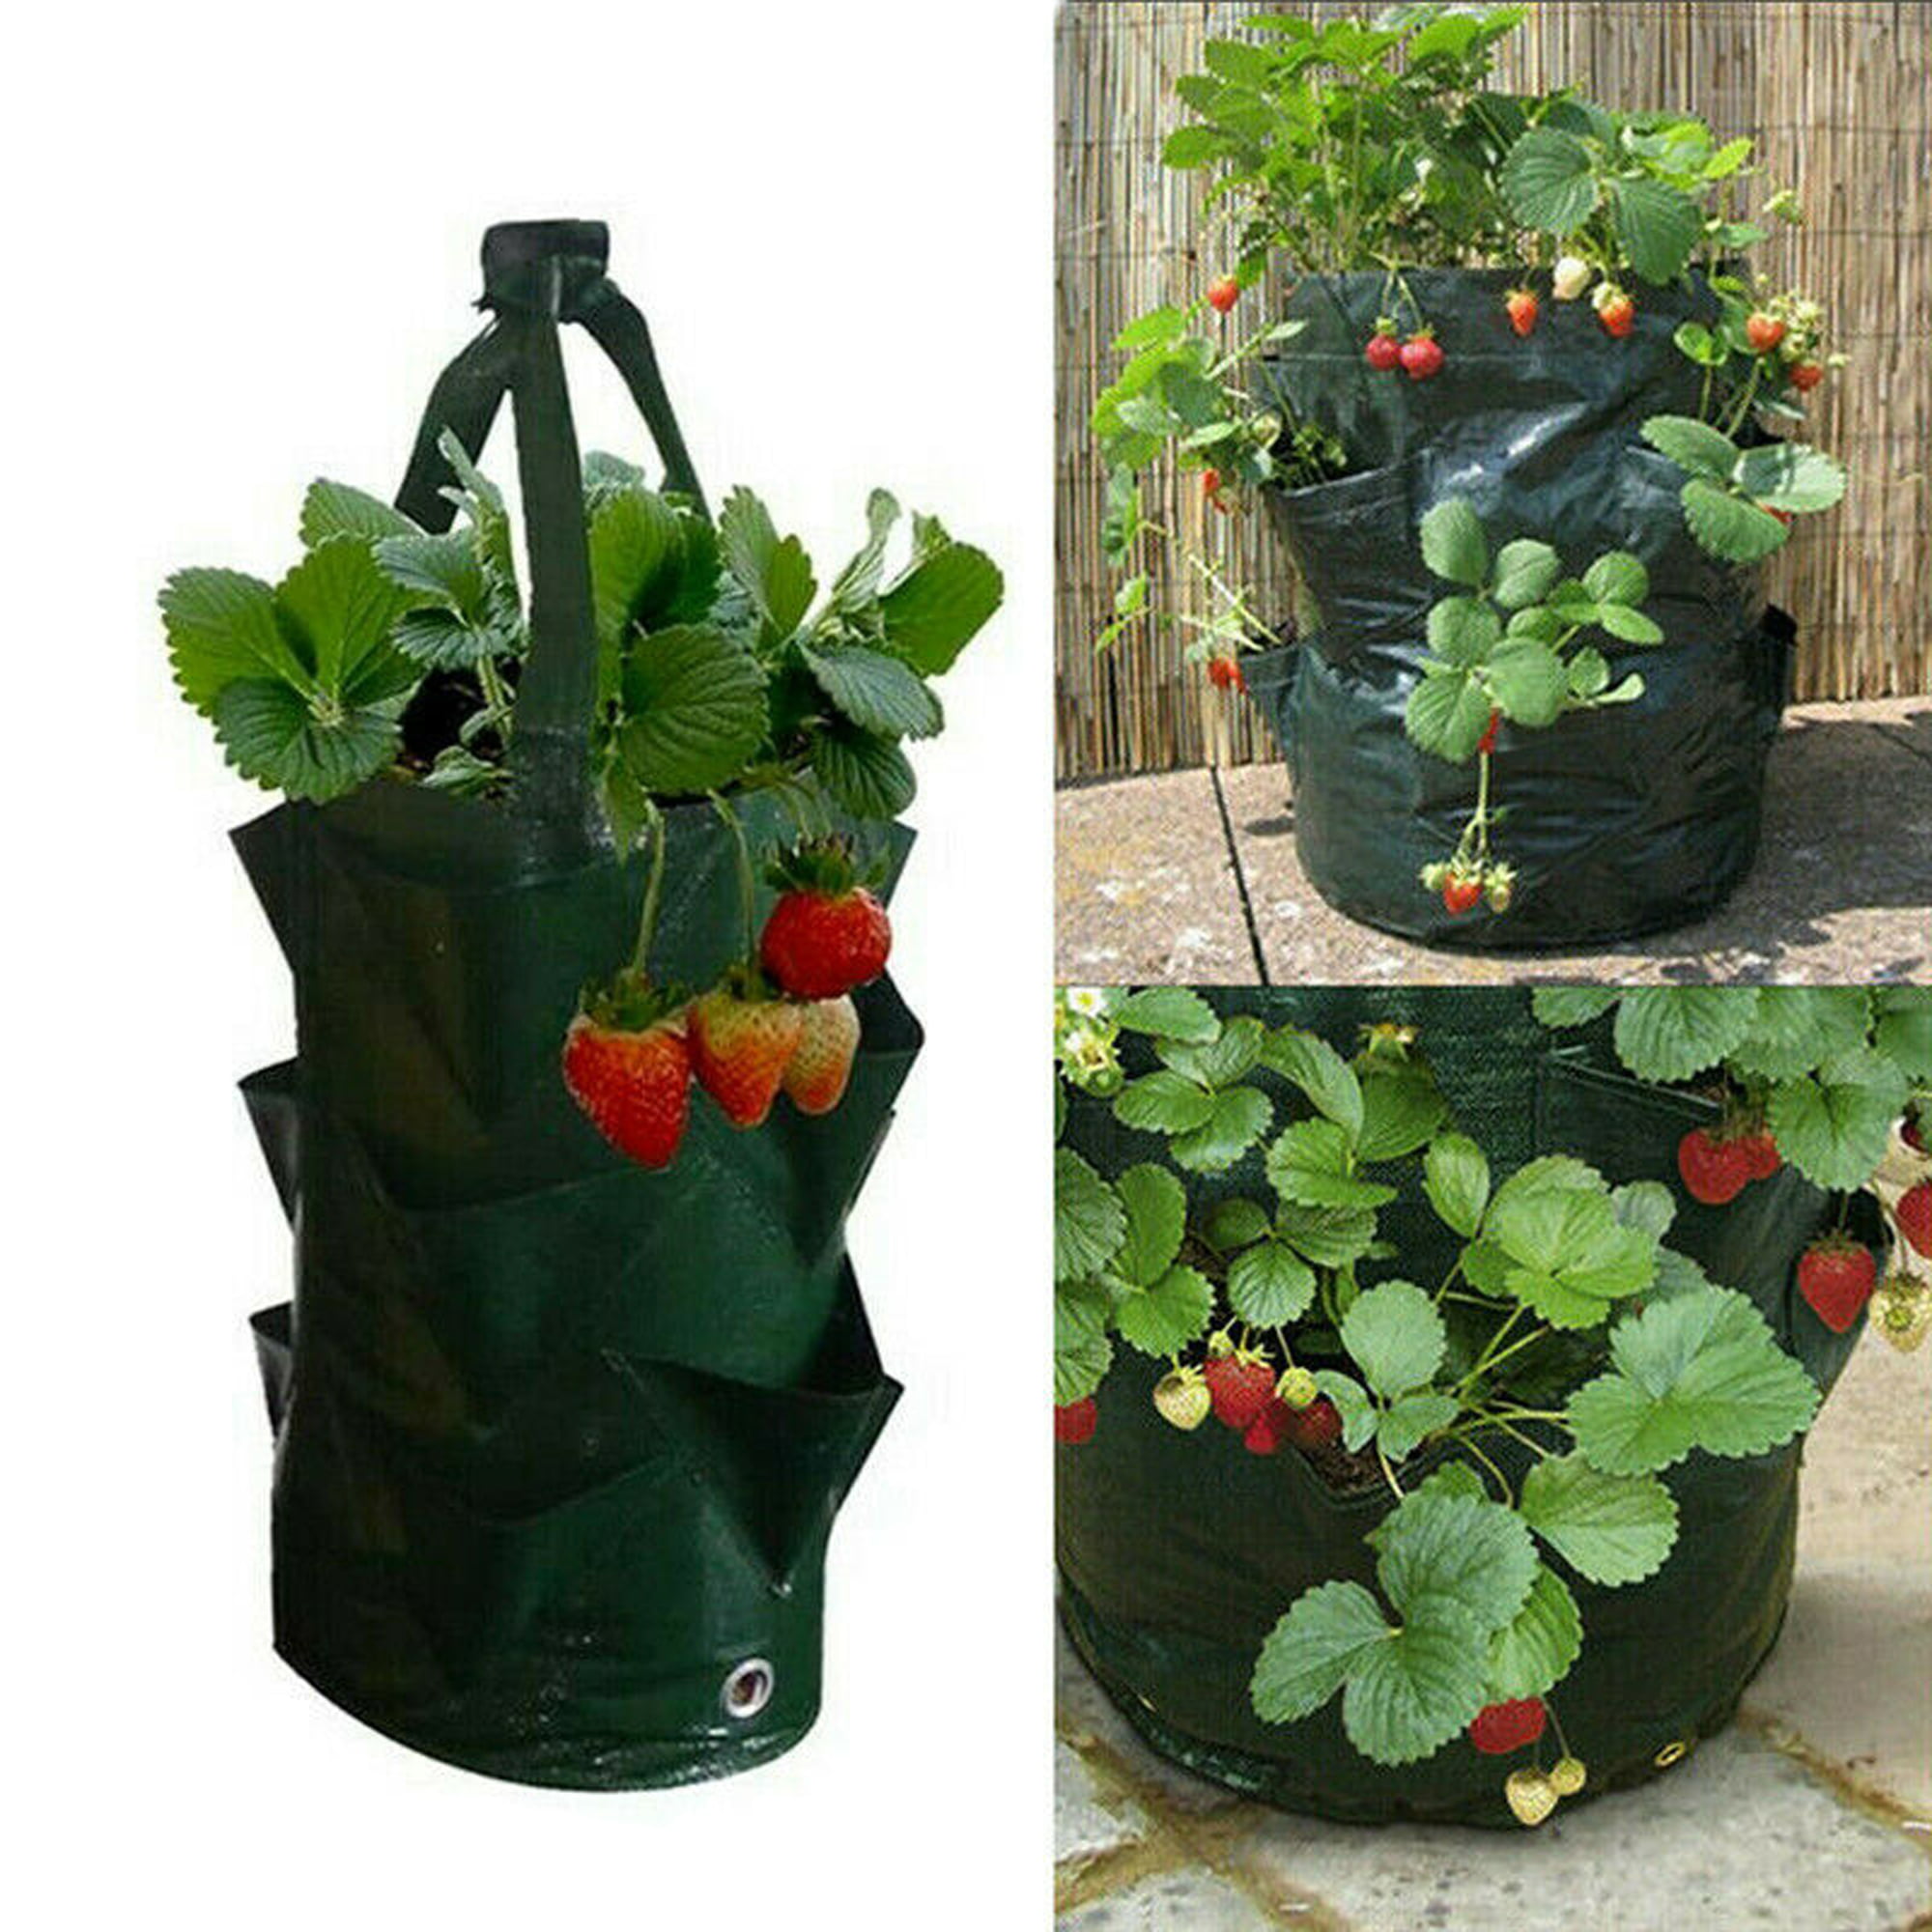 Details about  / Plant Grow Bag Hanging Strawberry Bare Root Planter F Home Use Garden Felt Pack